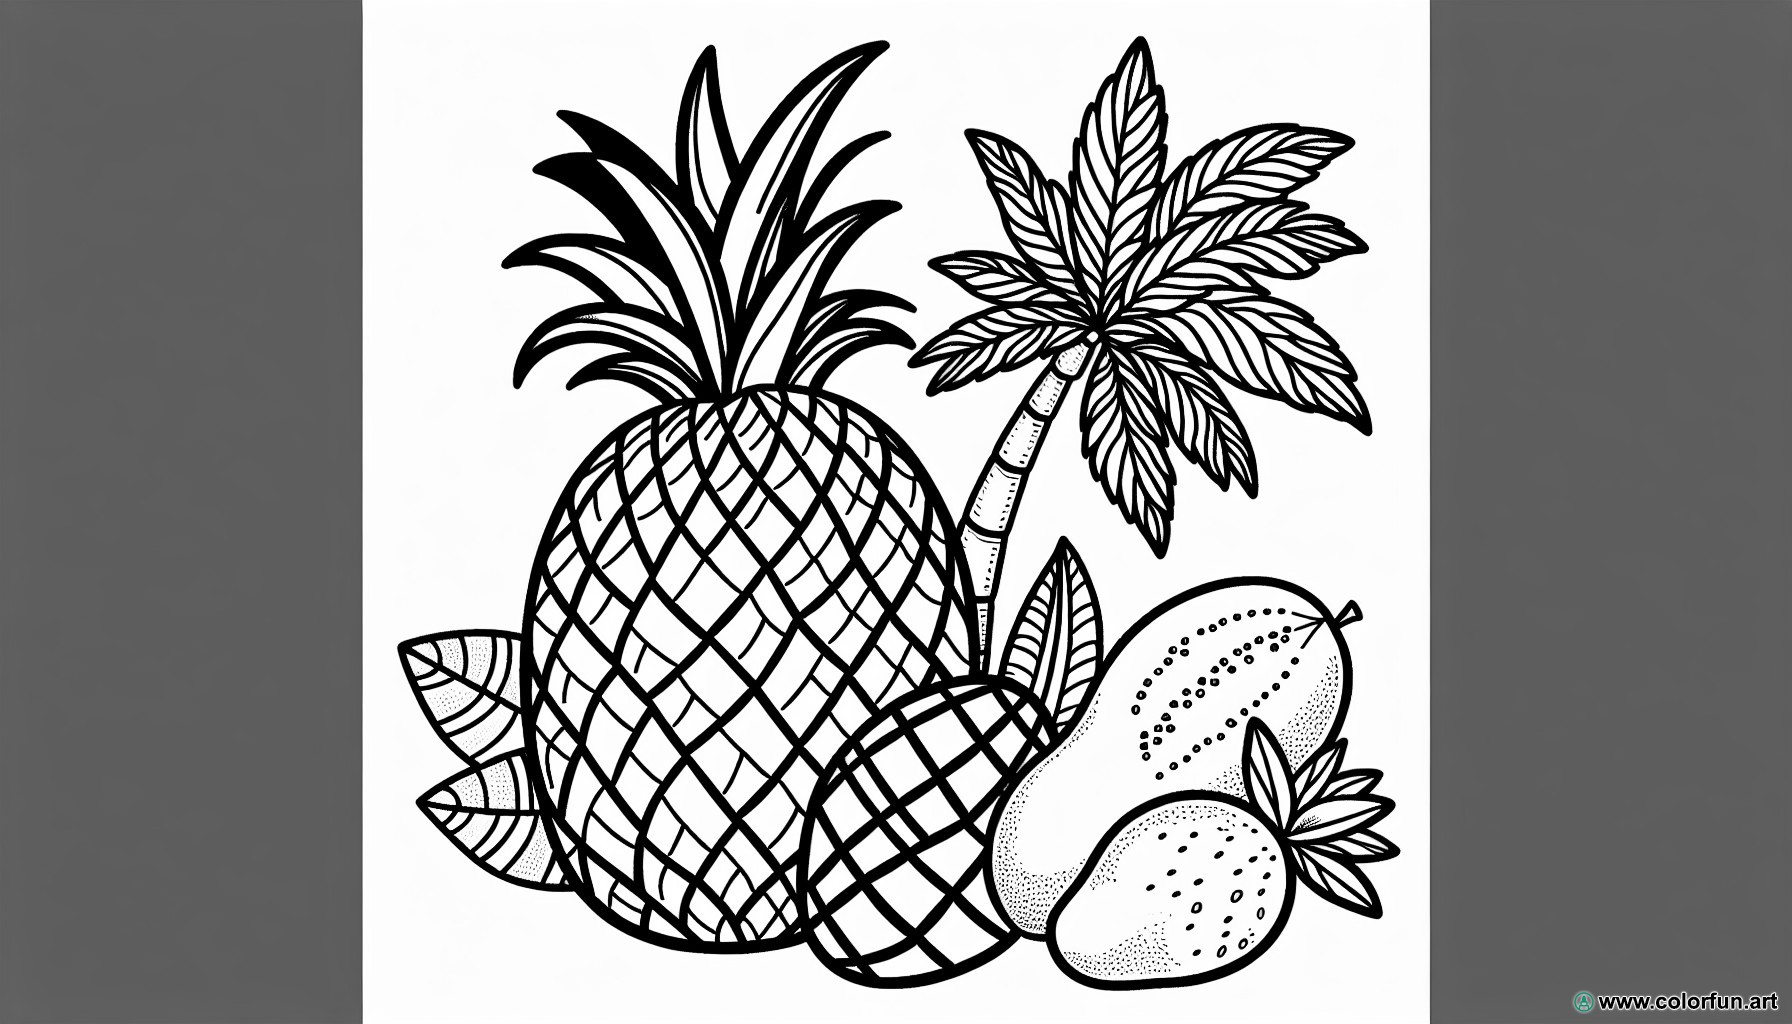 Coloring page of exotic fruits and vegetables